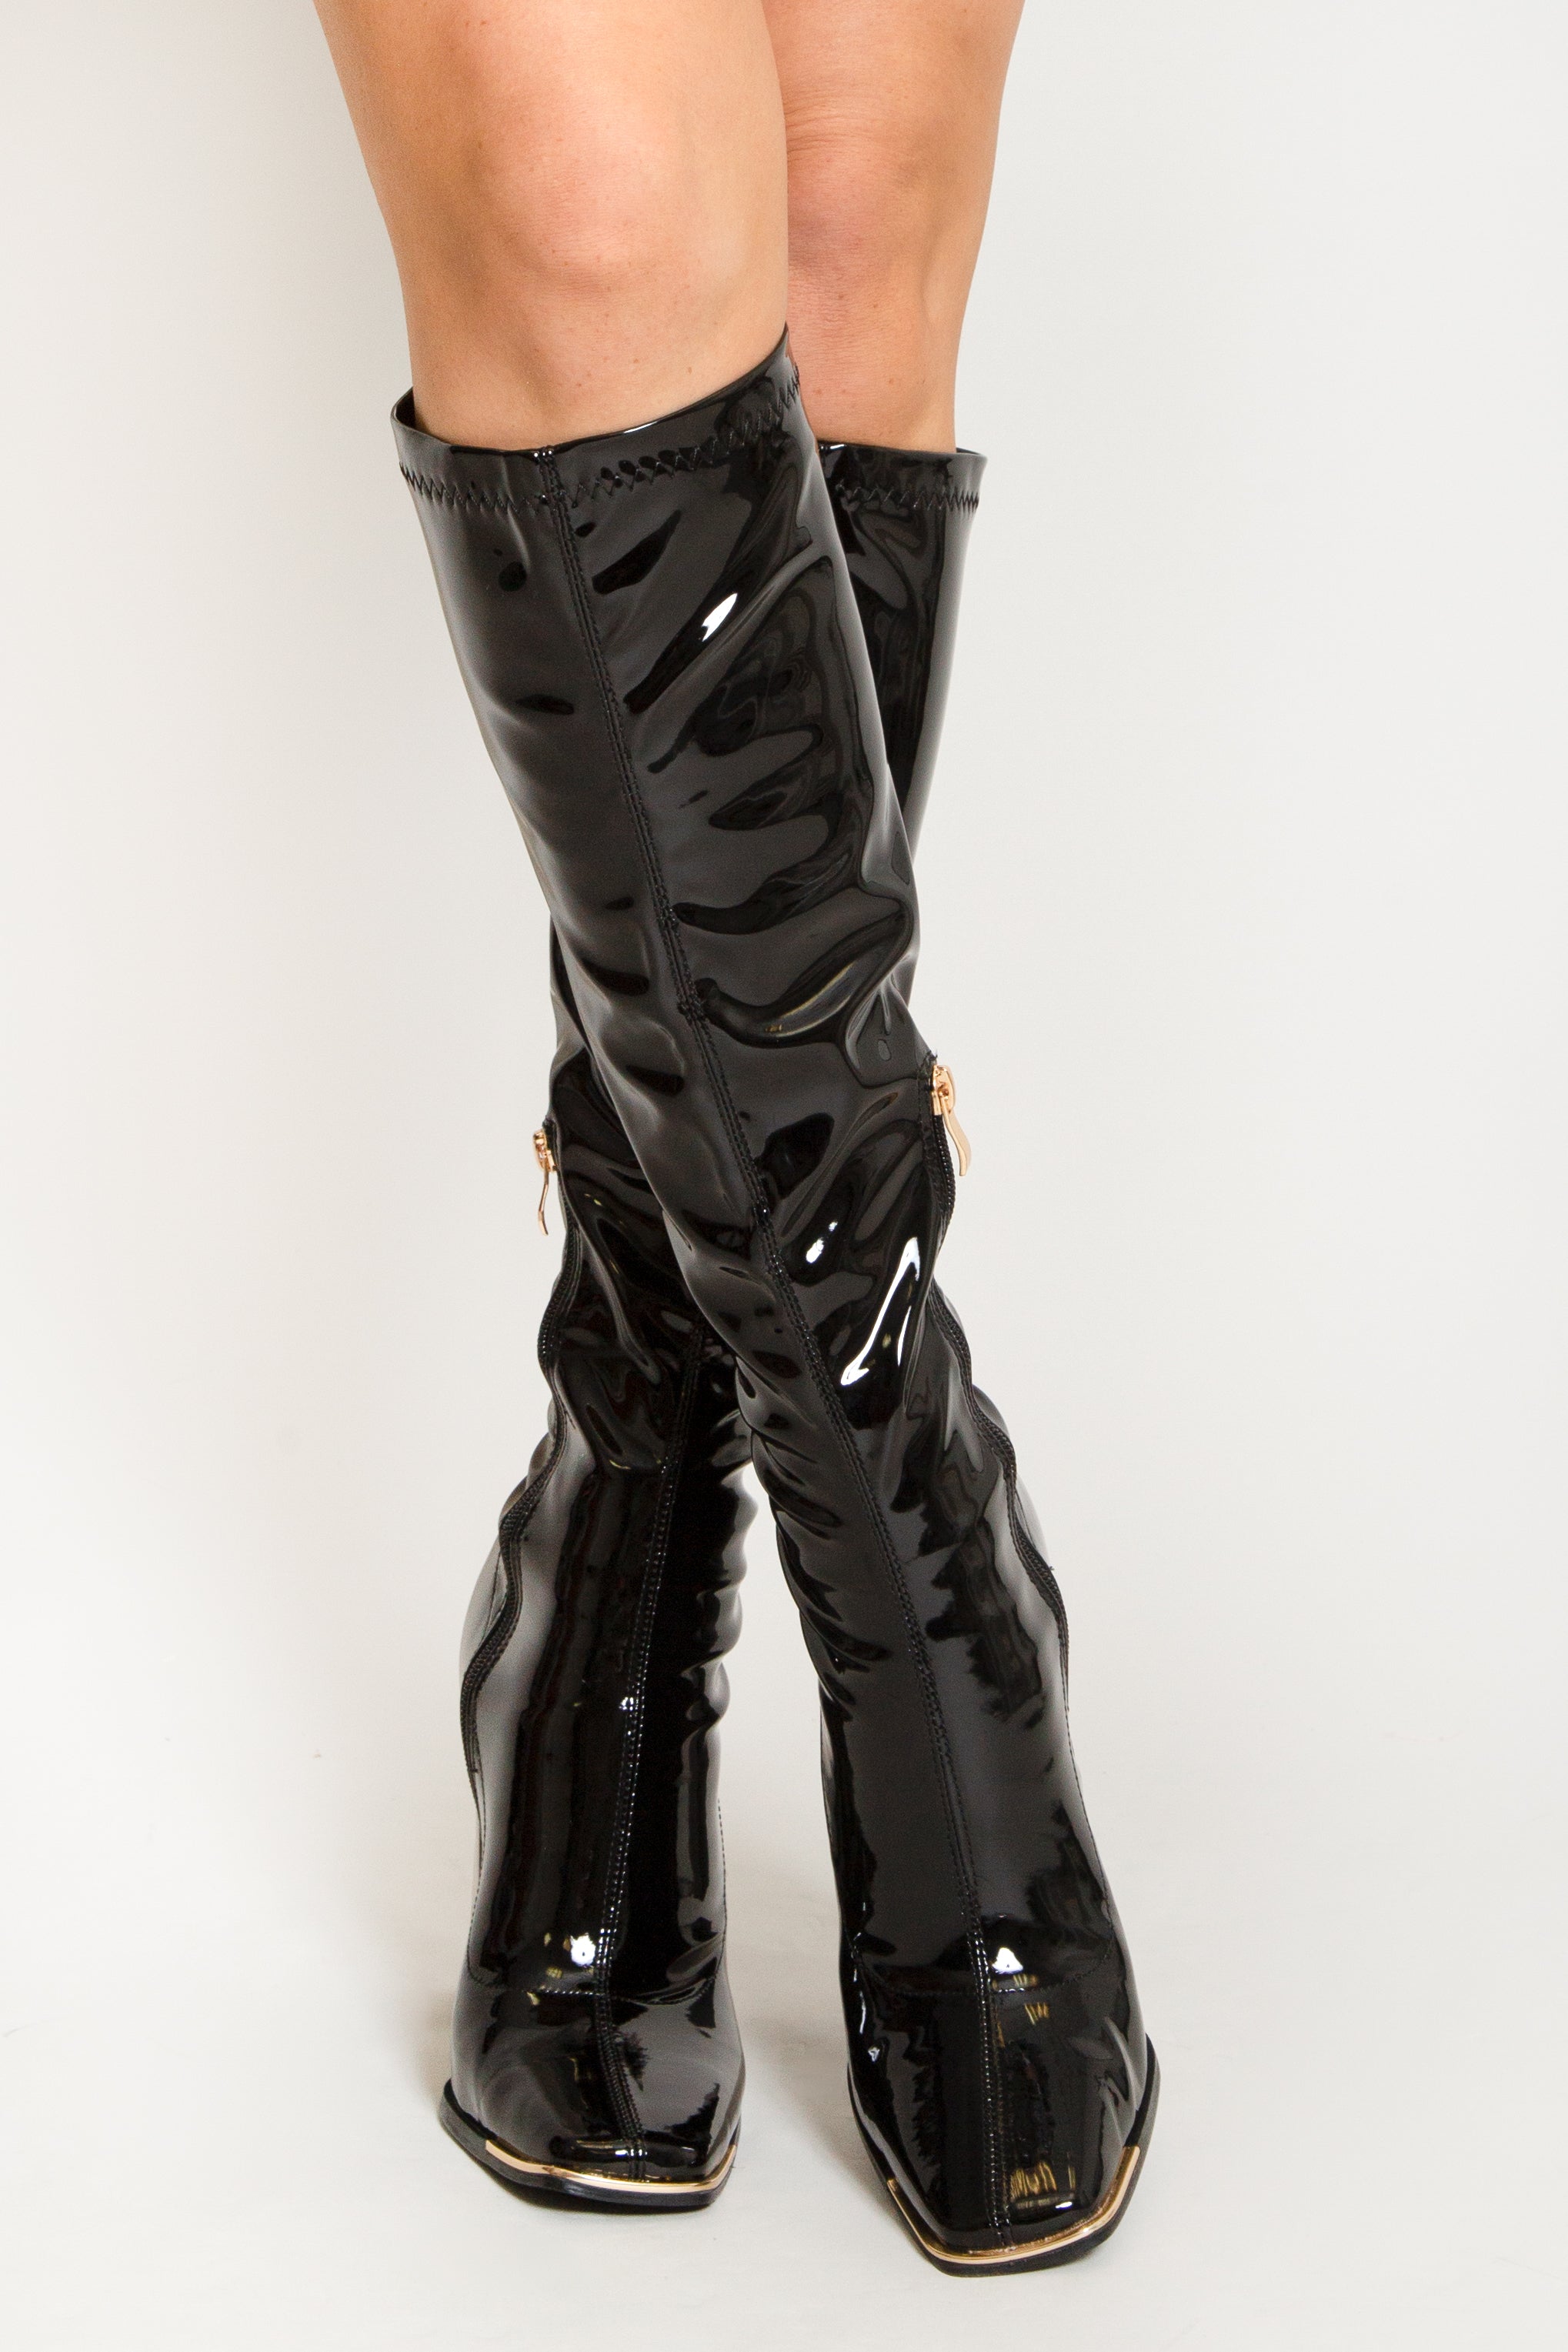 ASOS DESIGN Wide Fit Ellis high-heeled lace up boots in black patent -  ShopStyle